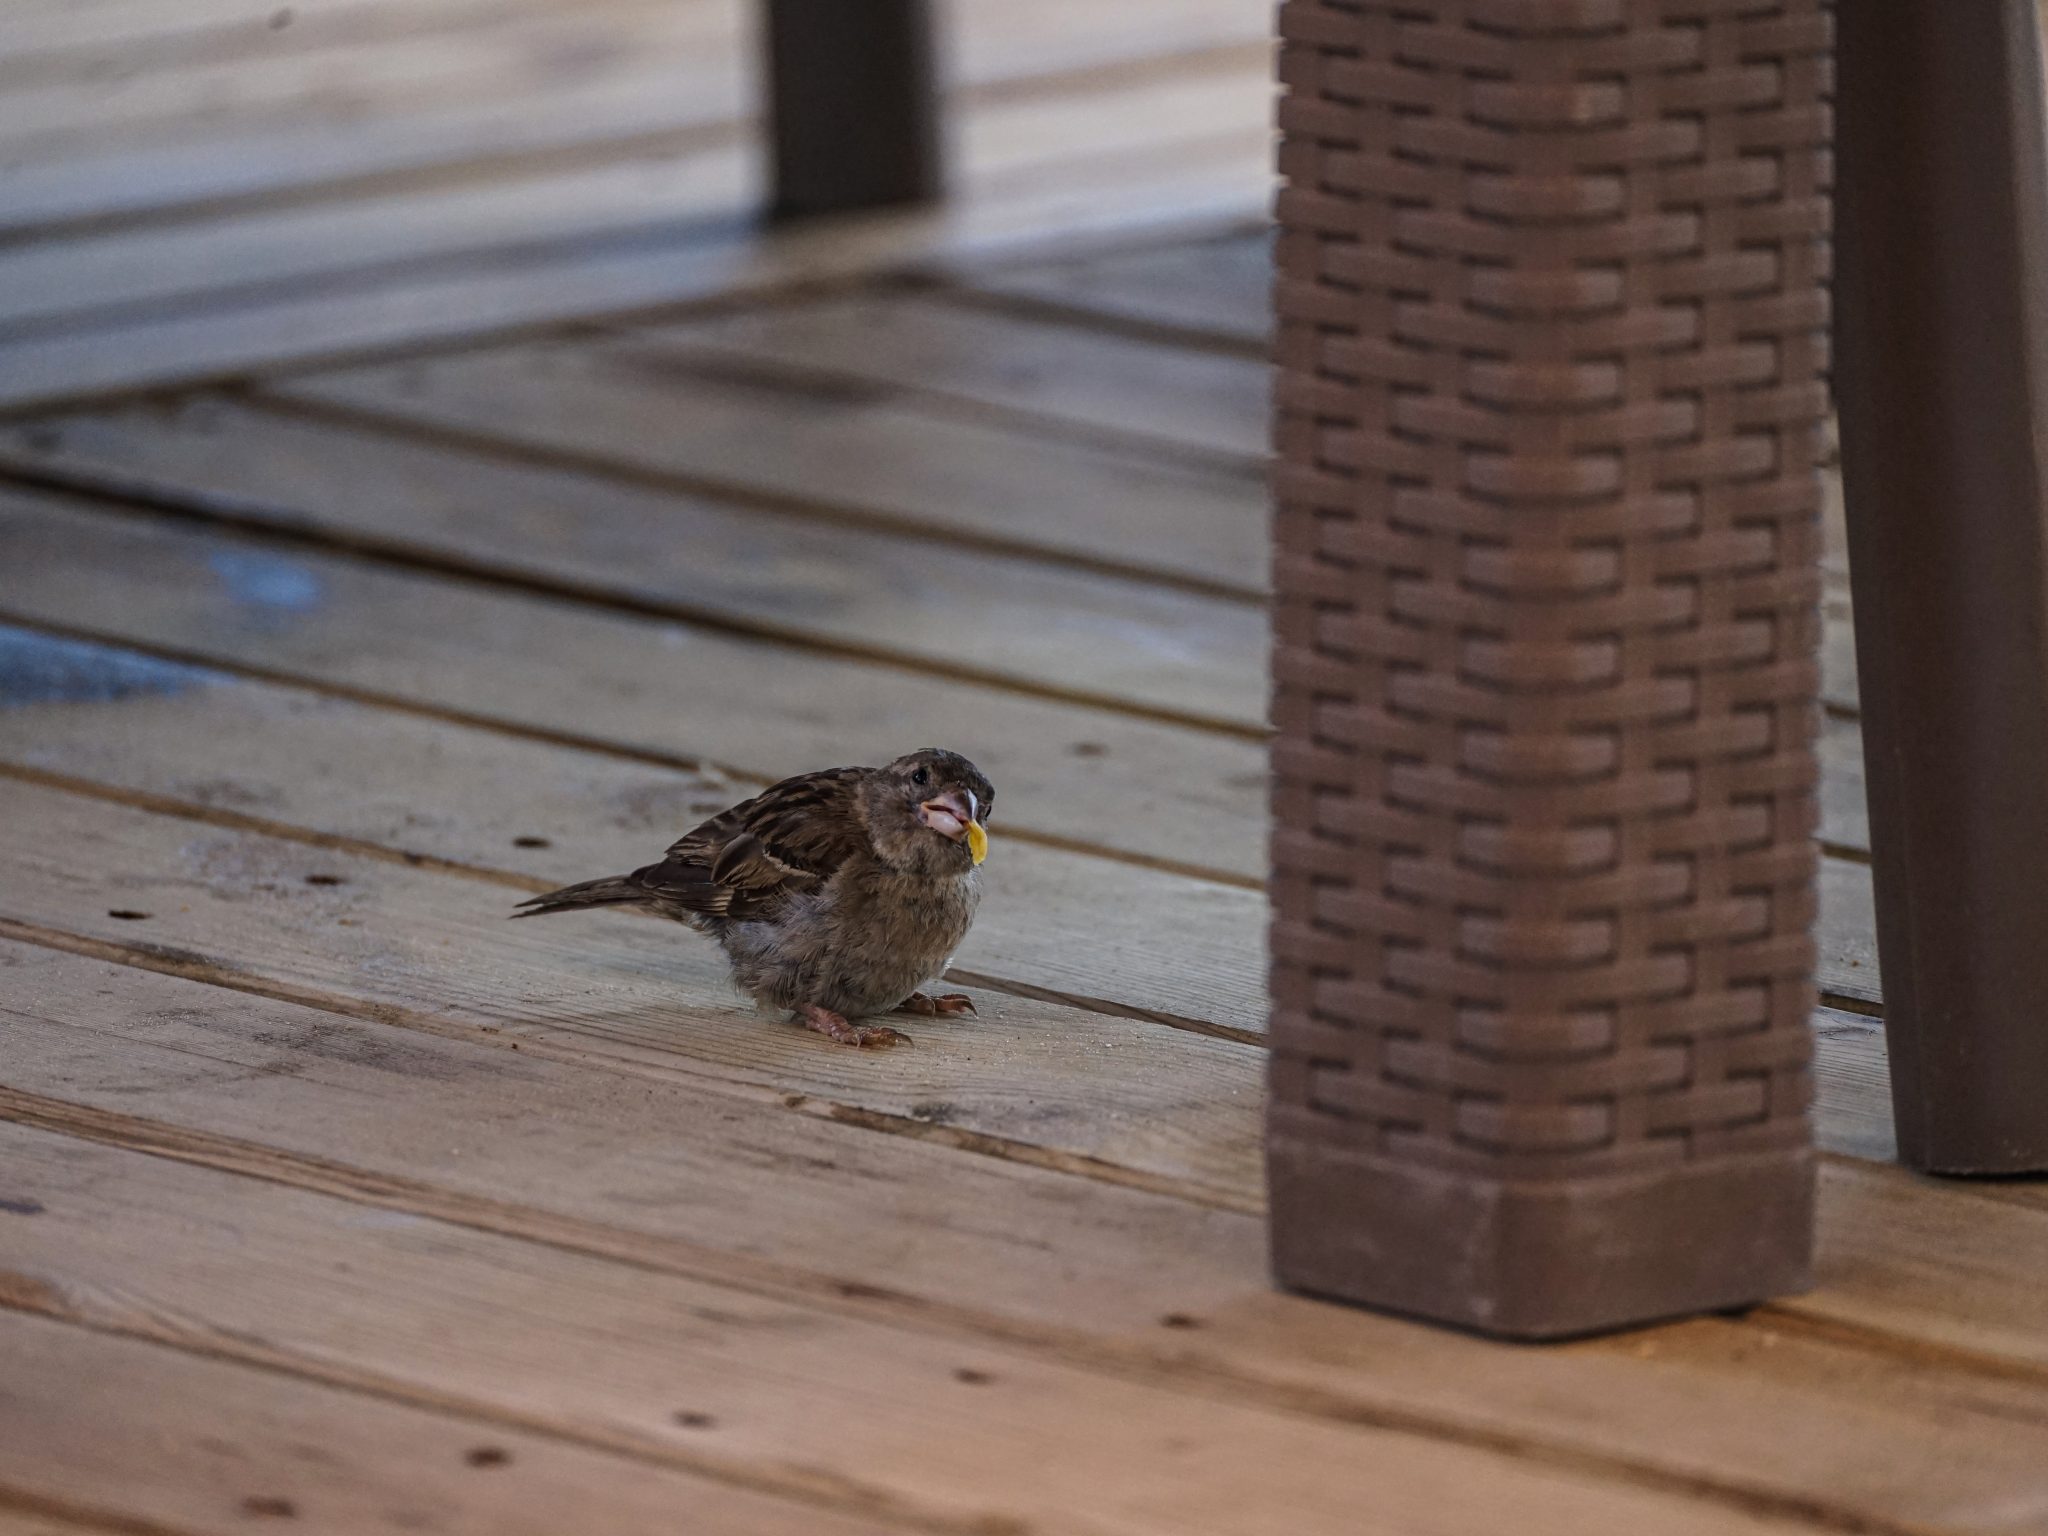 Chubby sparrow chick gnawing a cheeto